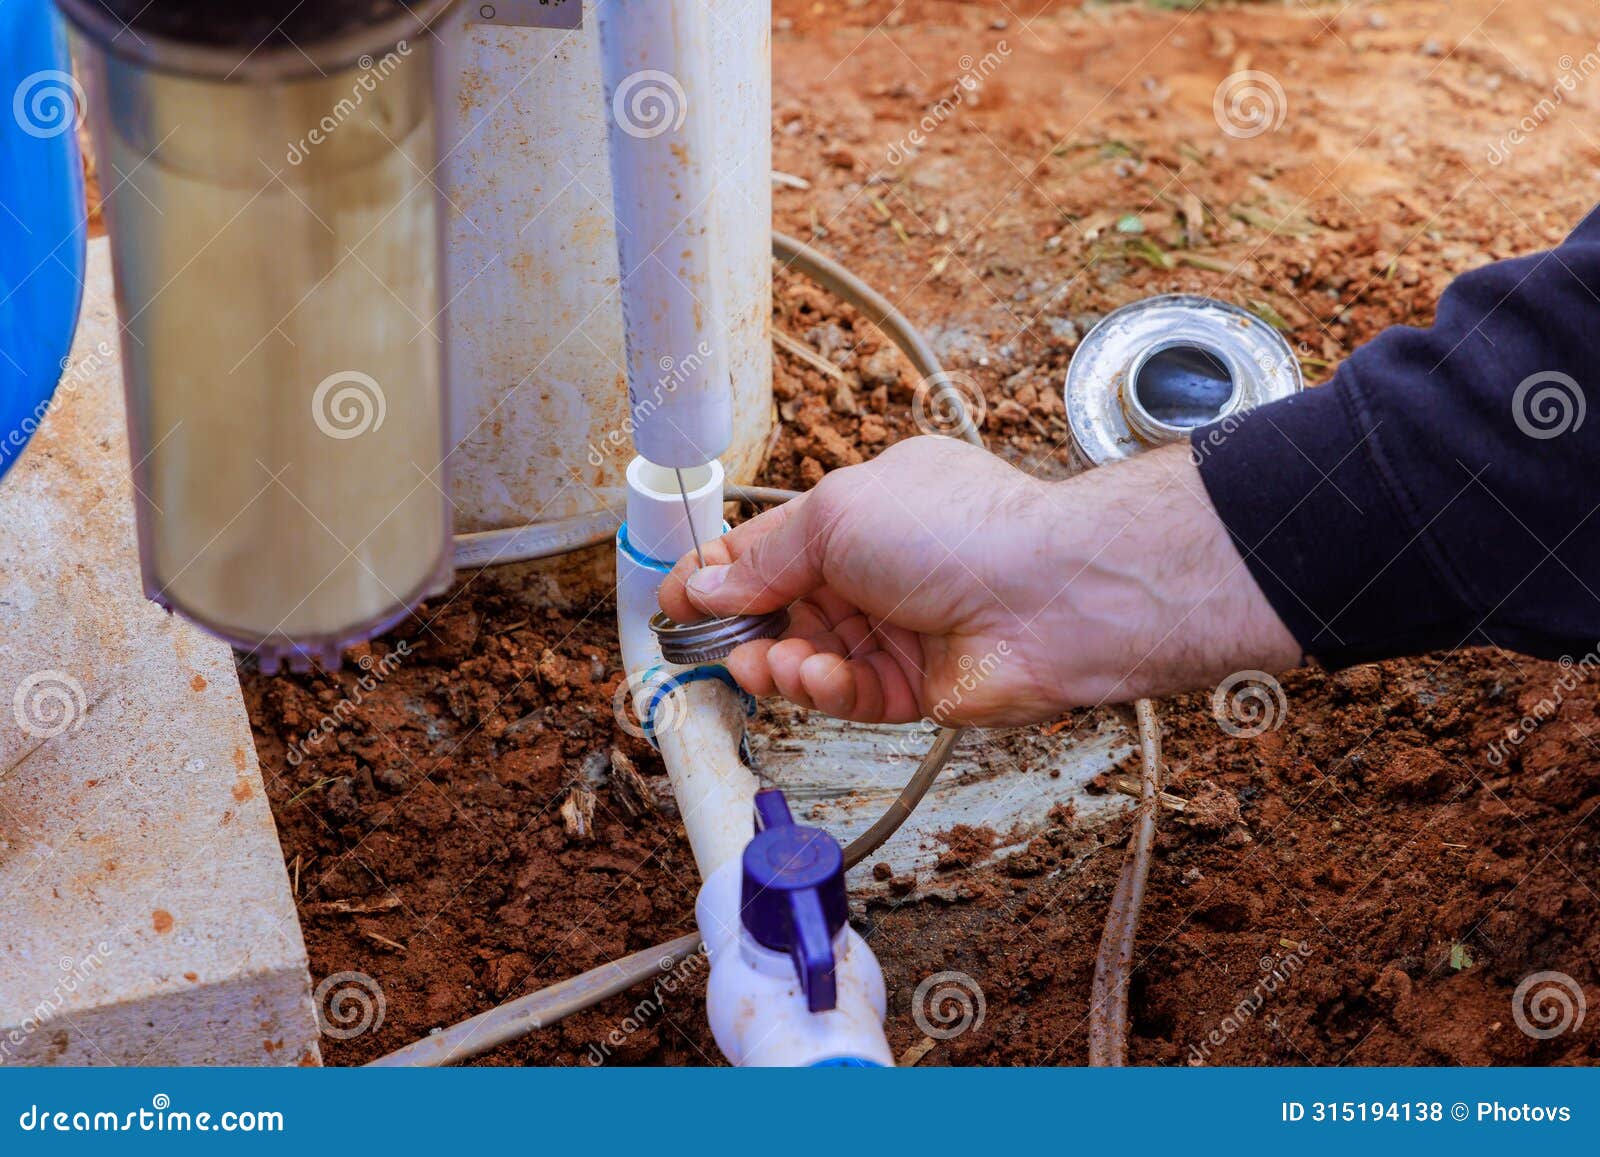 technician plumber uses clear primer for pvc pipe before a gluing it